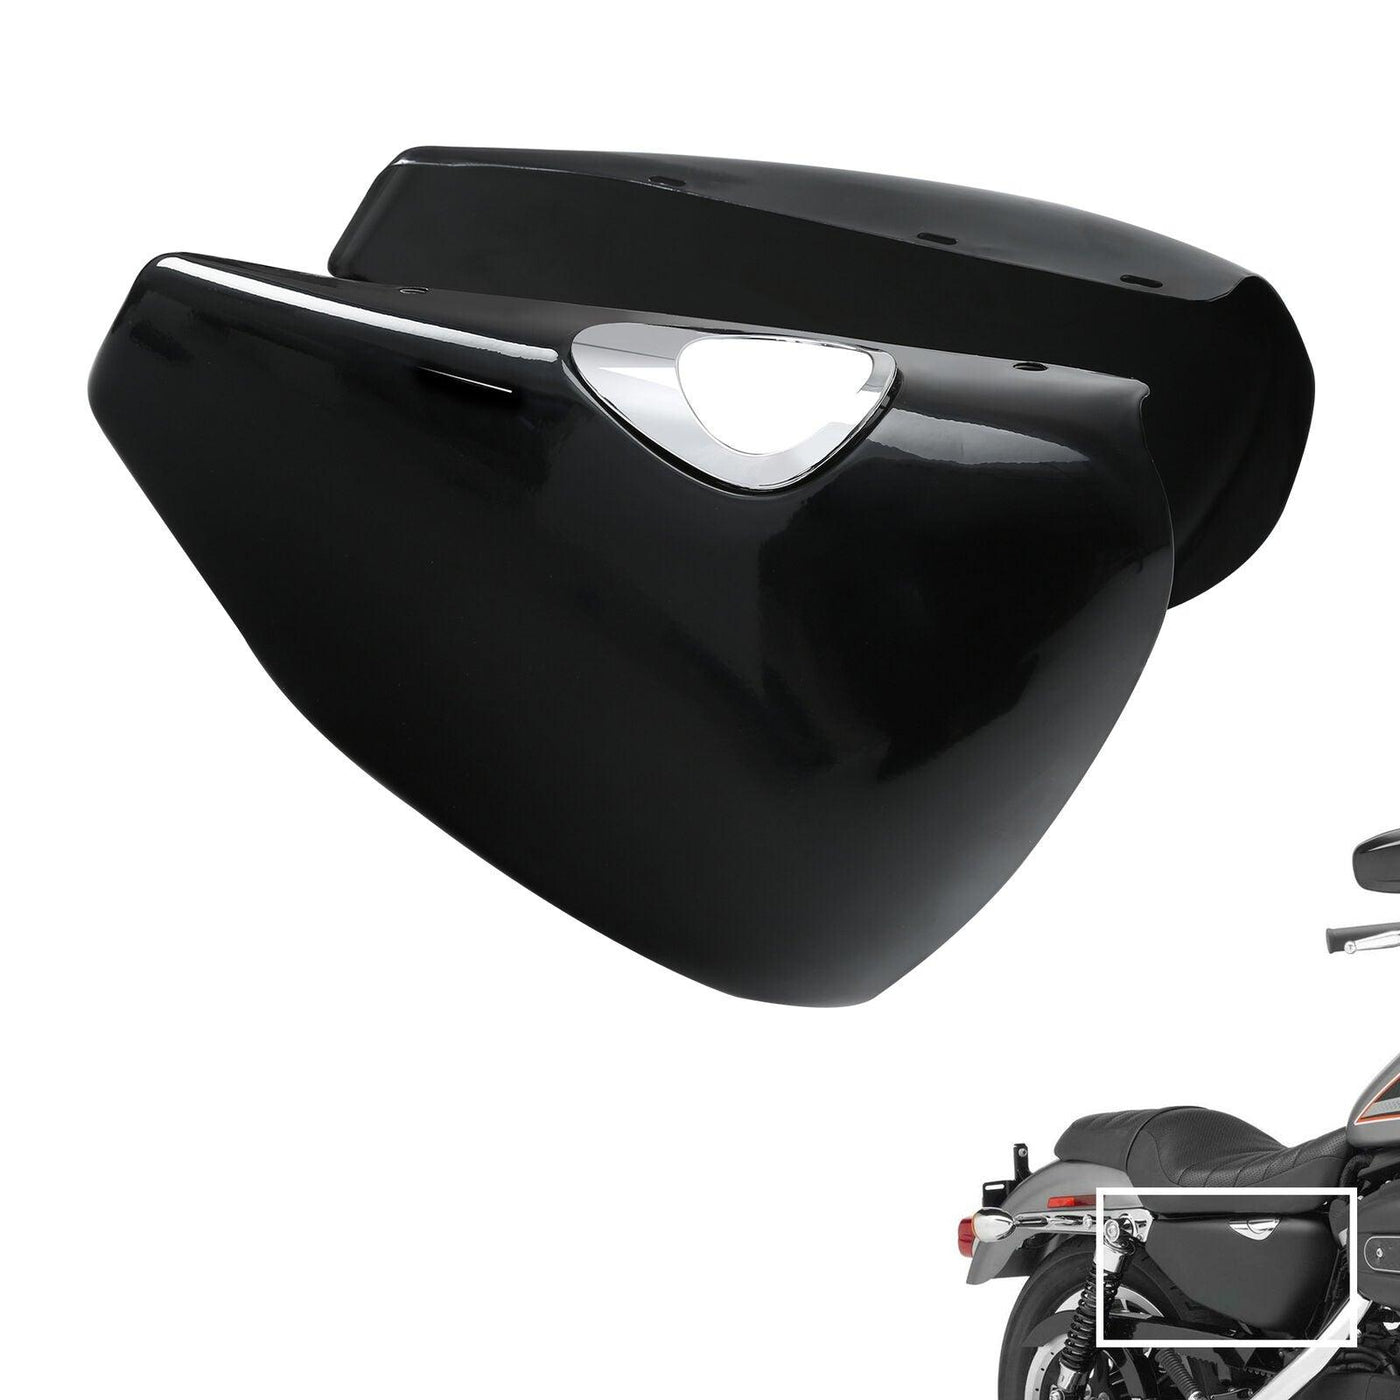 Left Right Battery Cover Fit For Harley Sportster Iron883 XL883N 2009-2013 Black - Moto Life Products